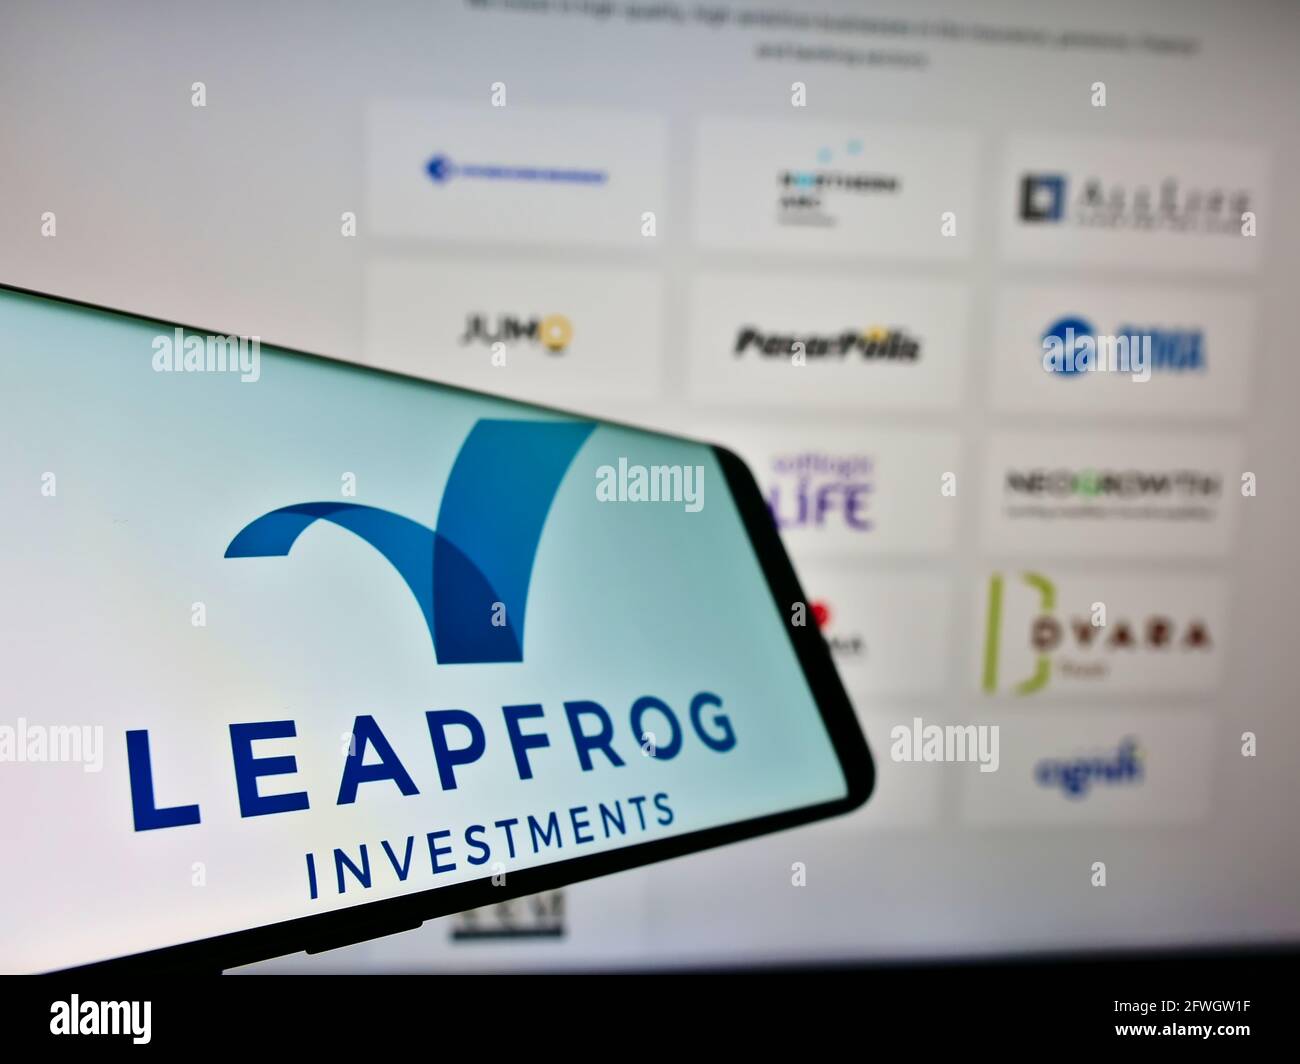 Mobile phone with logo of private equity business LeapFrog Investments on screen in front of company website. Focus on center-left of phone display. Stock Photo